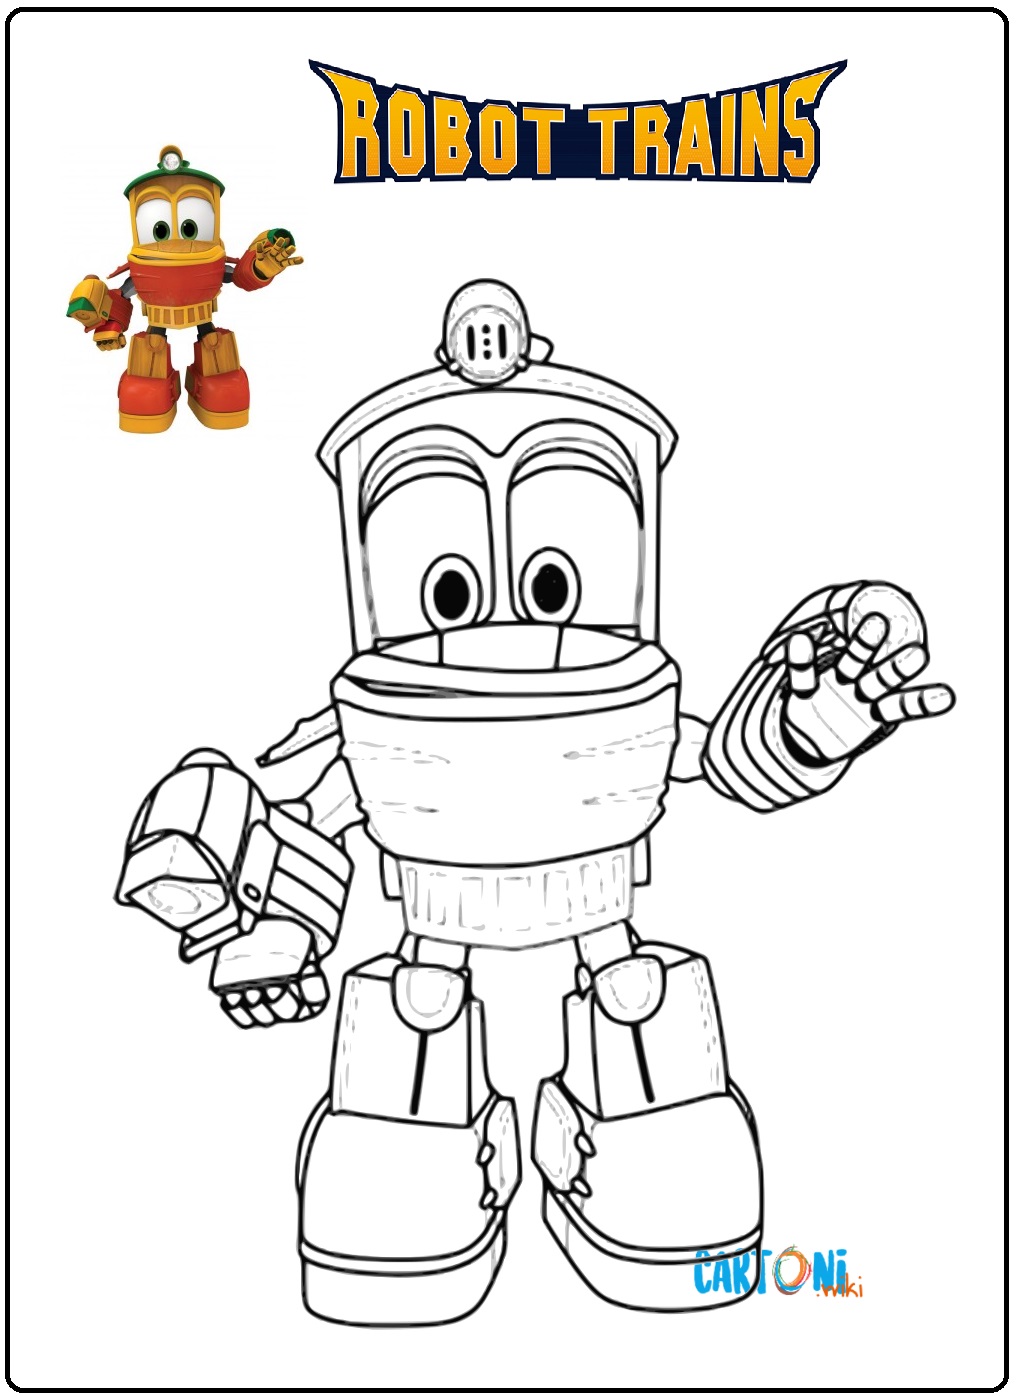 Robot trains coloring pages